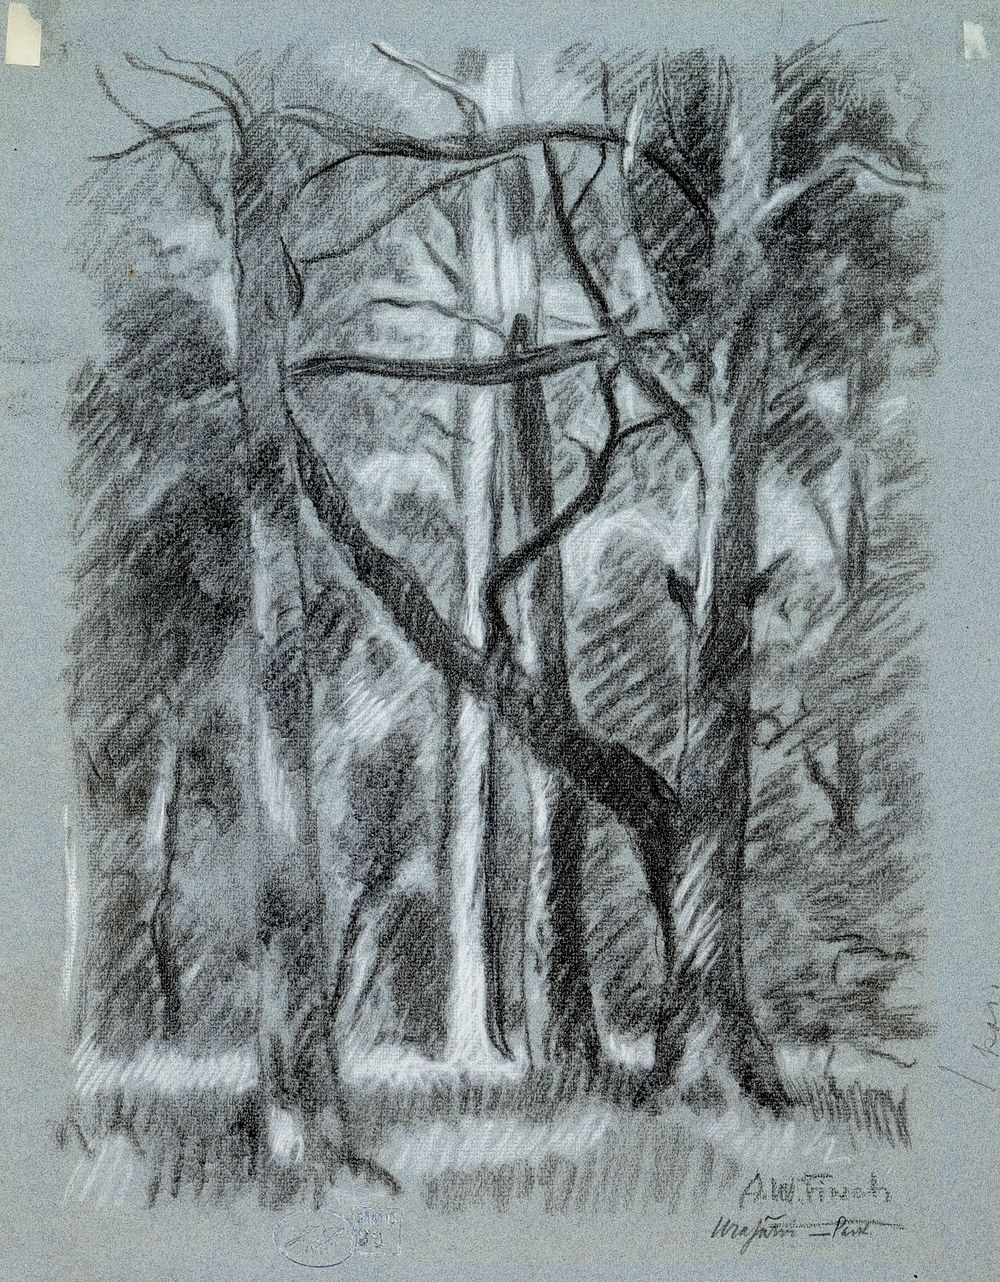 Forest landscape from urajärvi, 1923 by Alfred William Finch